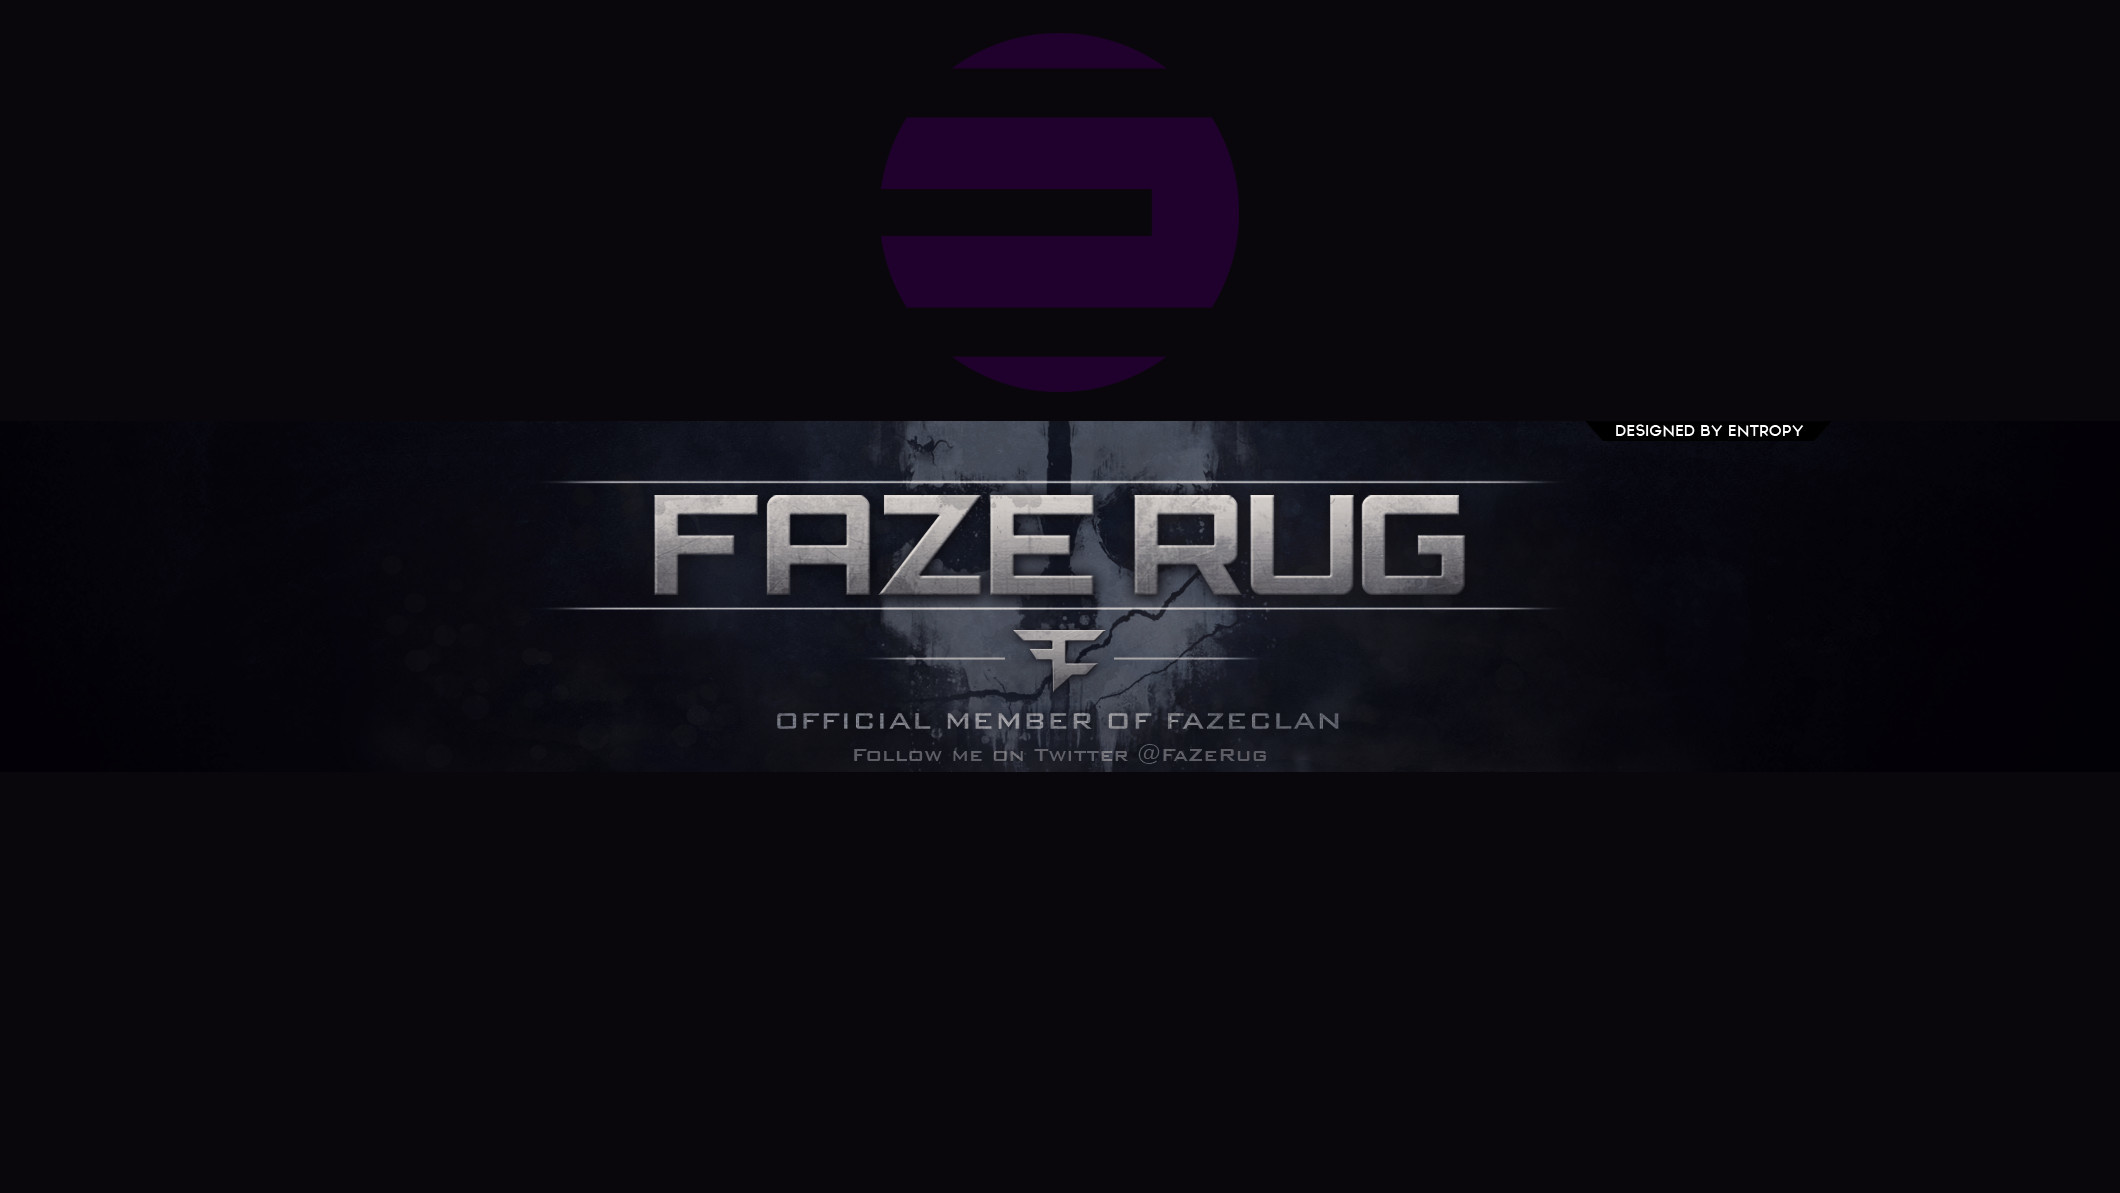 2120x1193 What is Faze Rugs Number Faze Rug 2d Banner by Entropy by Entropycreates On  Deviantart